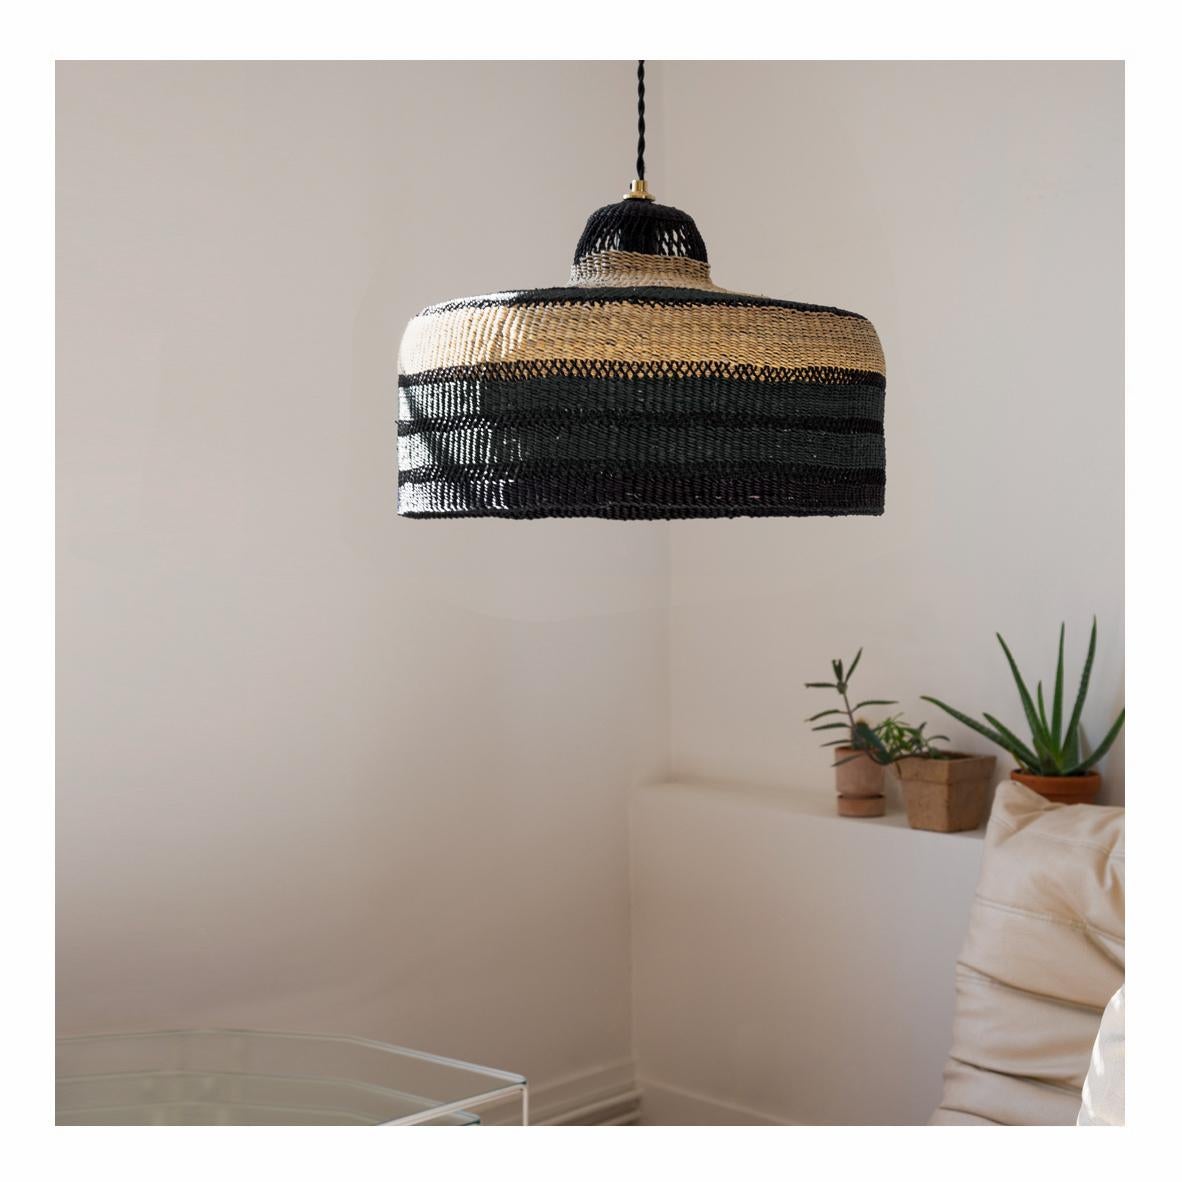 Medium woven pendant lamp high life M : 
Midnight Black meets natural straw
Colour: midnight (black)

Are you looking for a lamp that combines tradition and elegance? This medium size pendant lamp with black and natural stripes will fill your